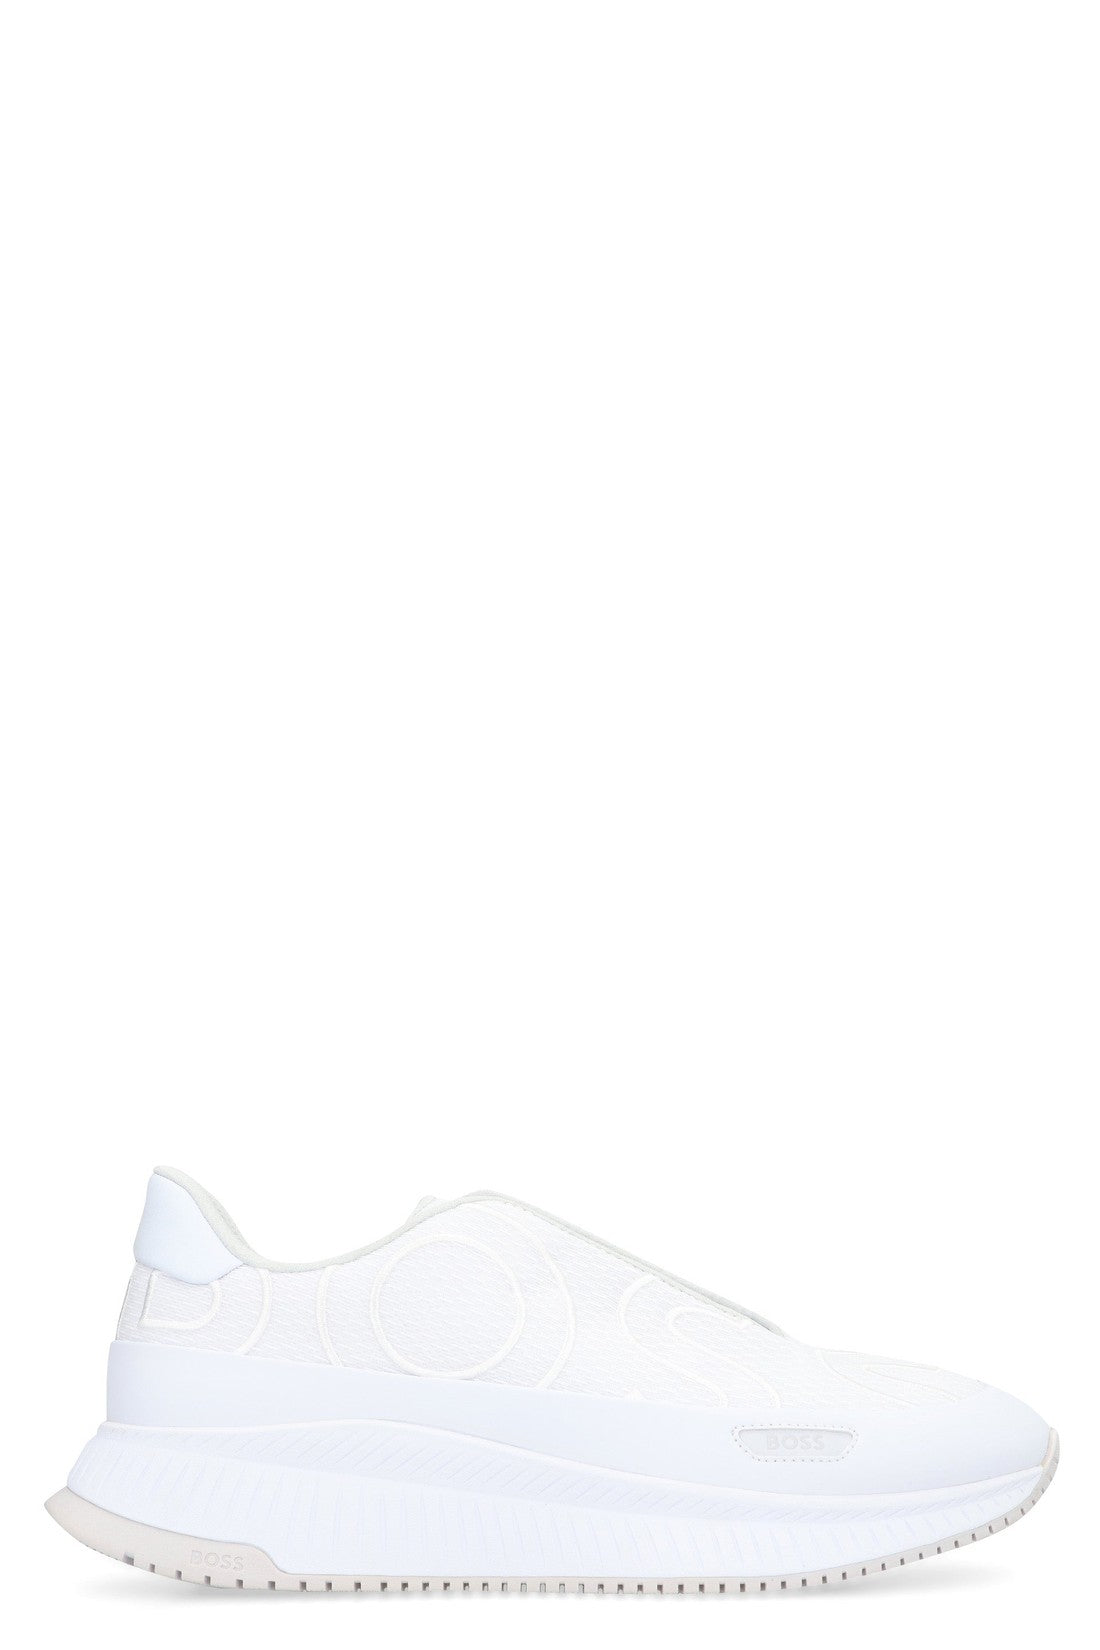 BOSS-OUTLET-SALE-Fabric low-top sneakers-ARCHIVIST